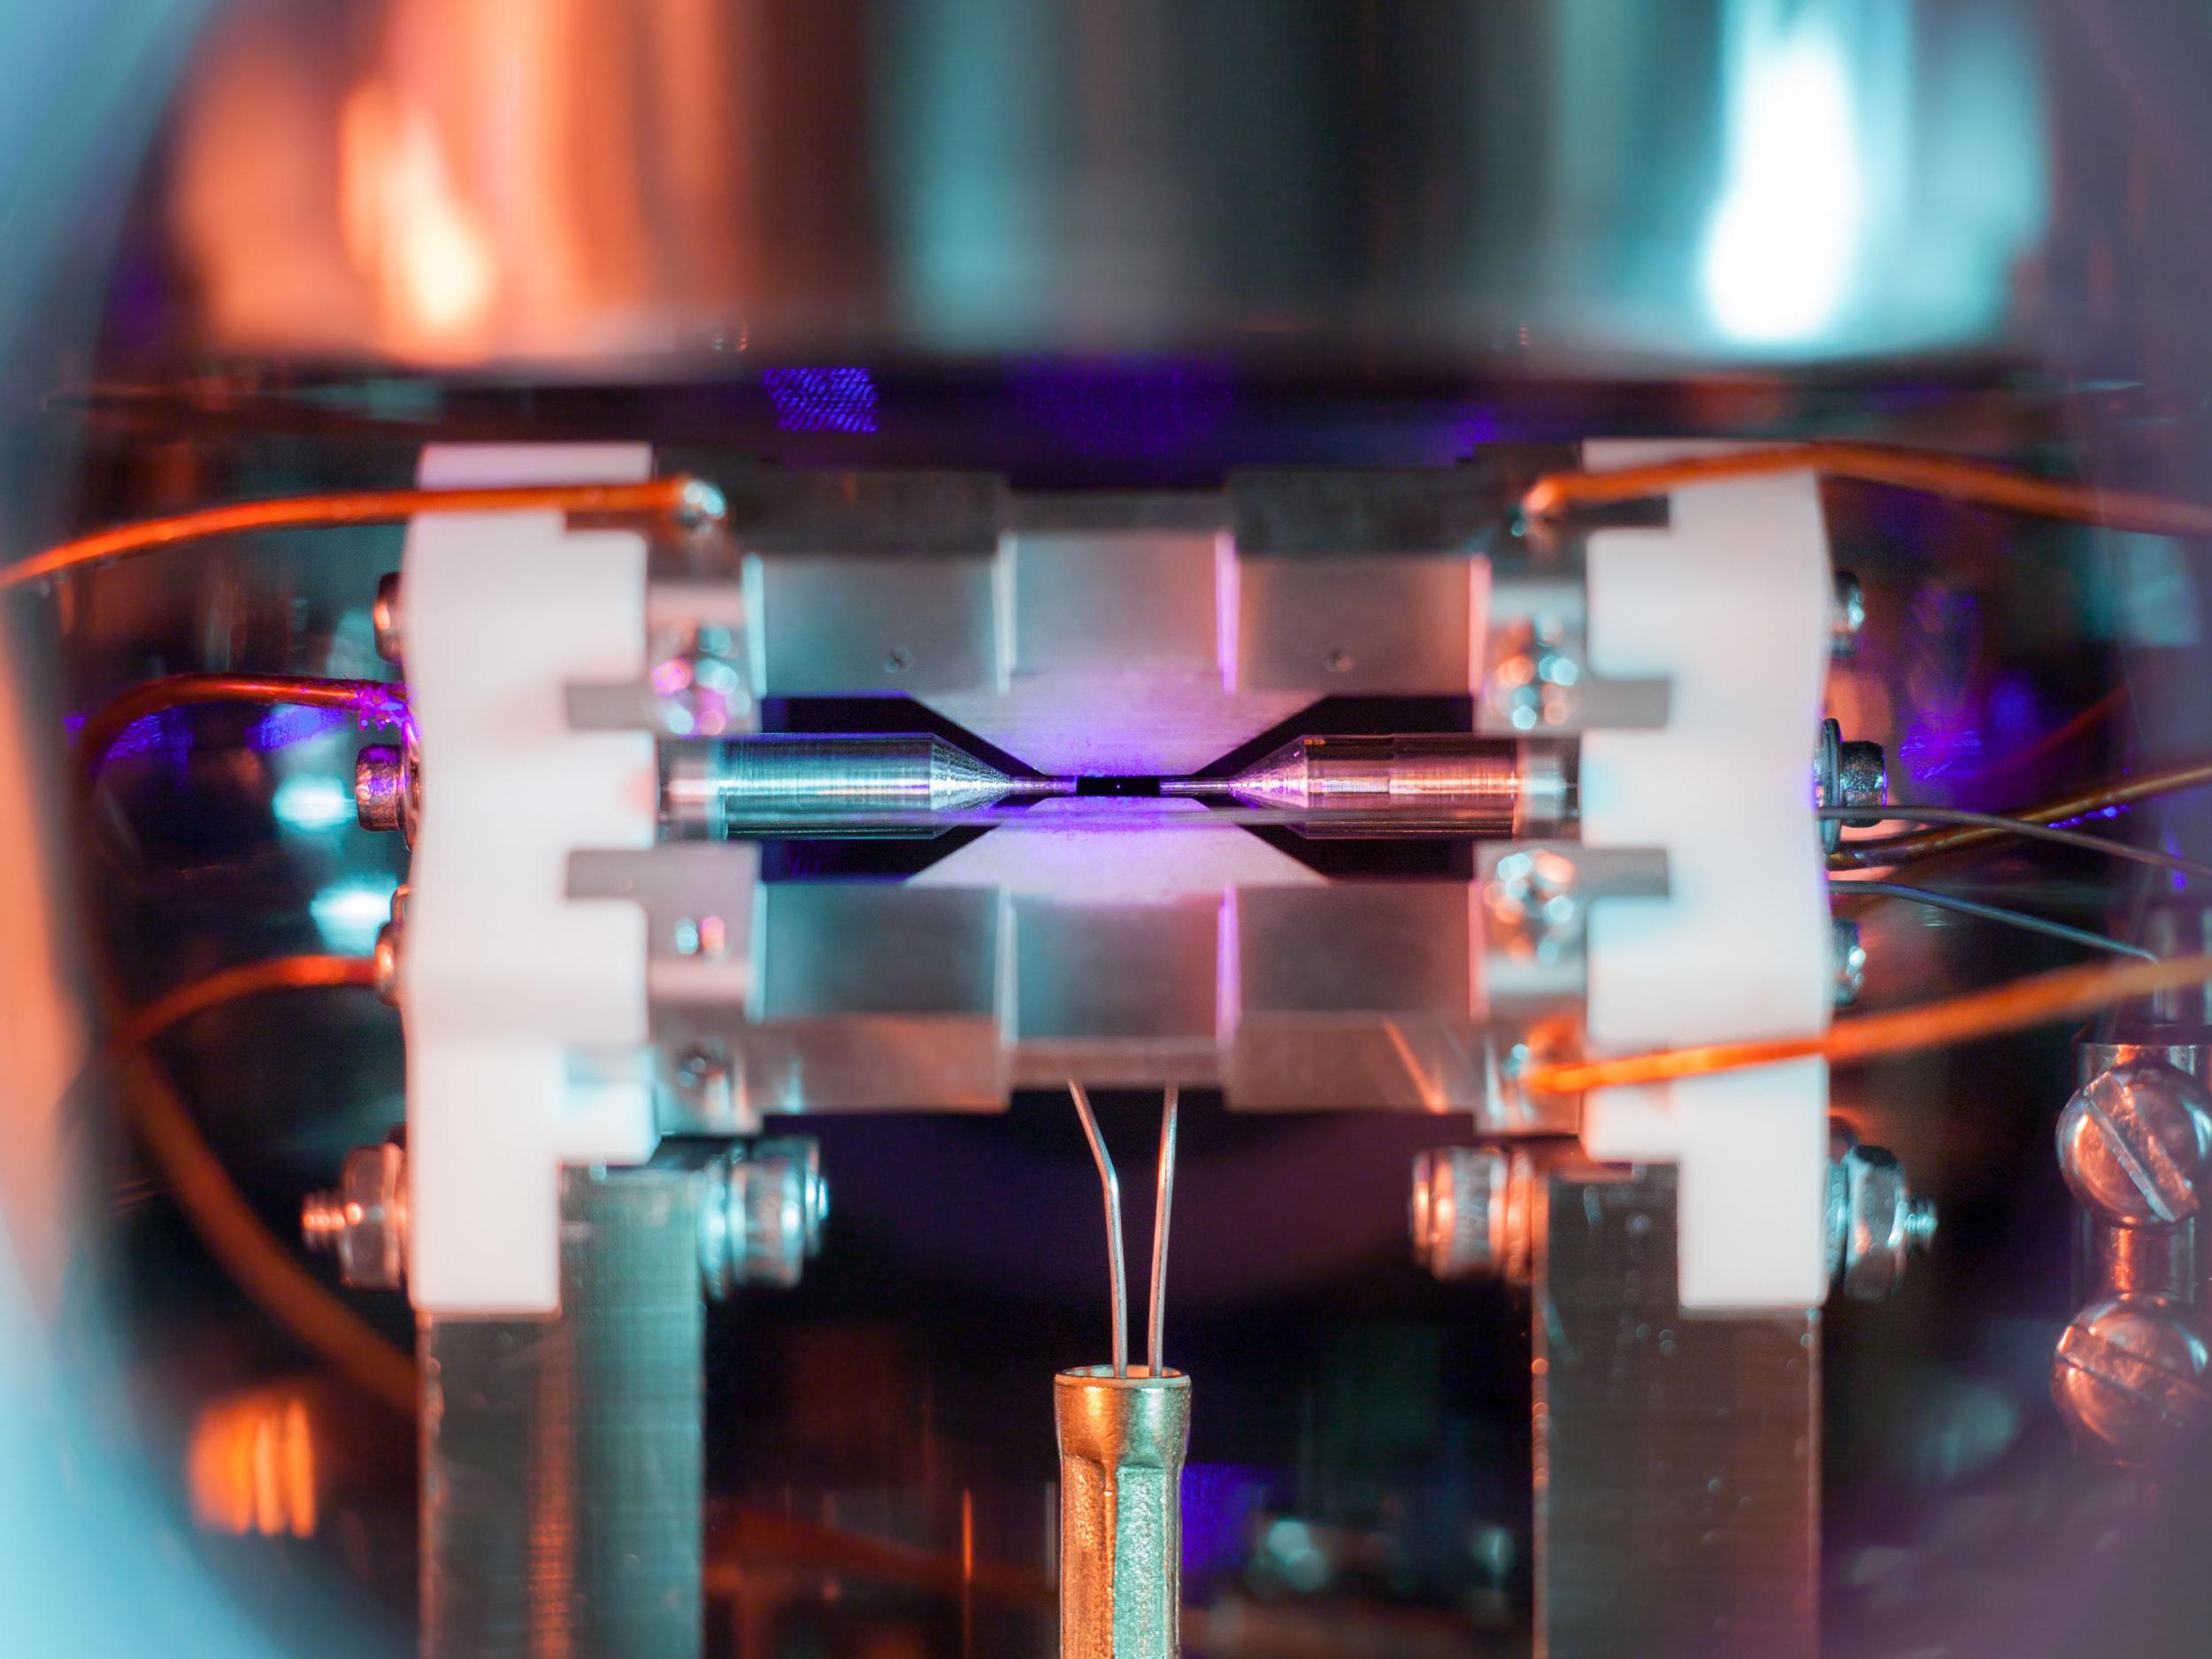 This picture, taken at the Clarendon Laboratory at Oxford University and showing a single glowing atom of strontium, is the Overall Winner in the Engineering and Physical Sciences Research Council's annual photography competition